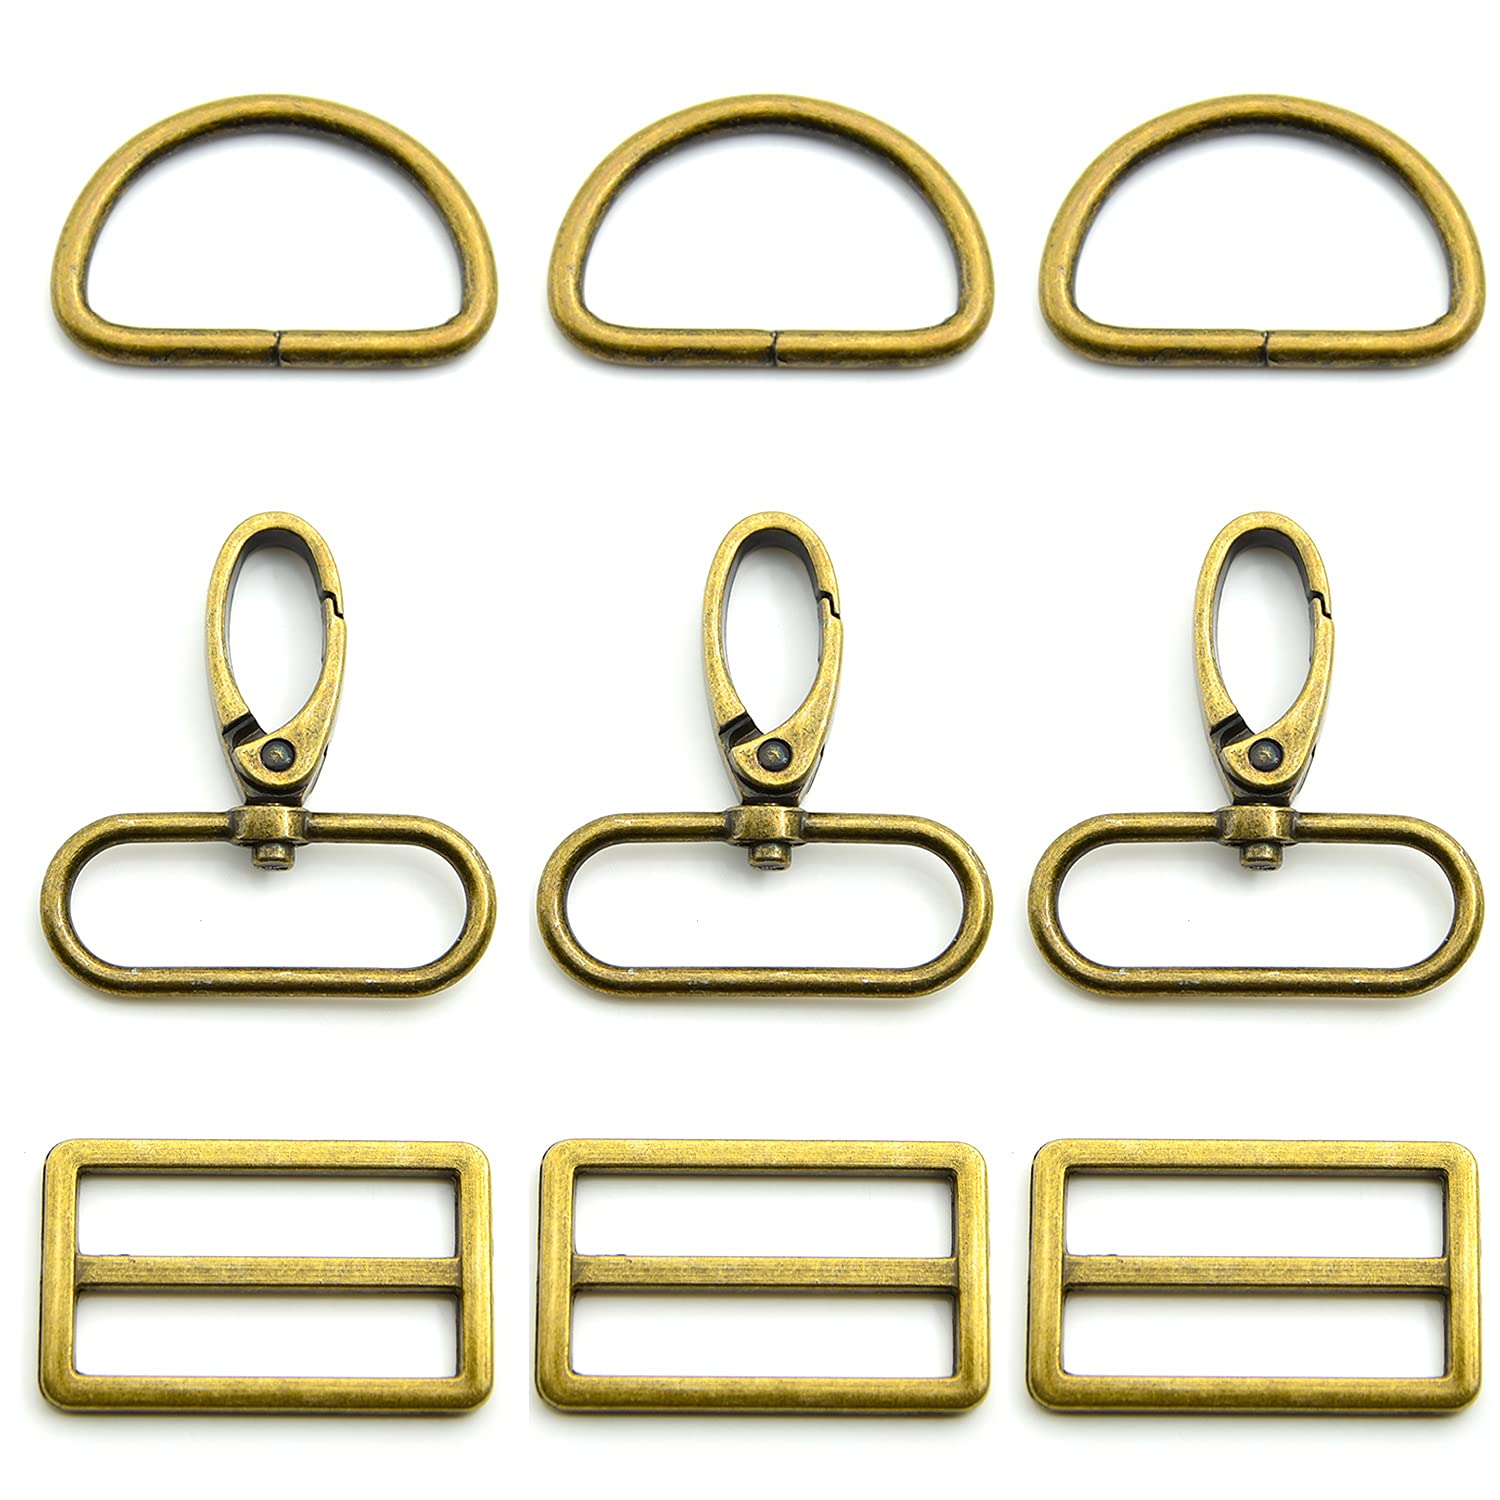 D Tail Hook Buckle and Metal Roller Pin Buckle DIY Accessories for